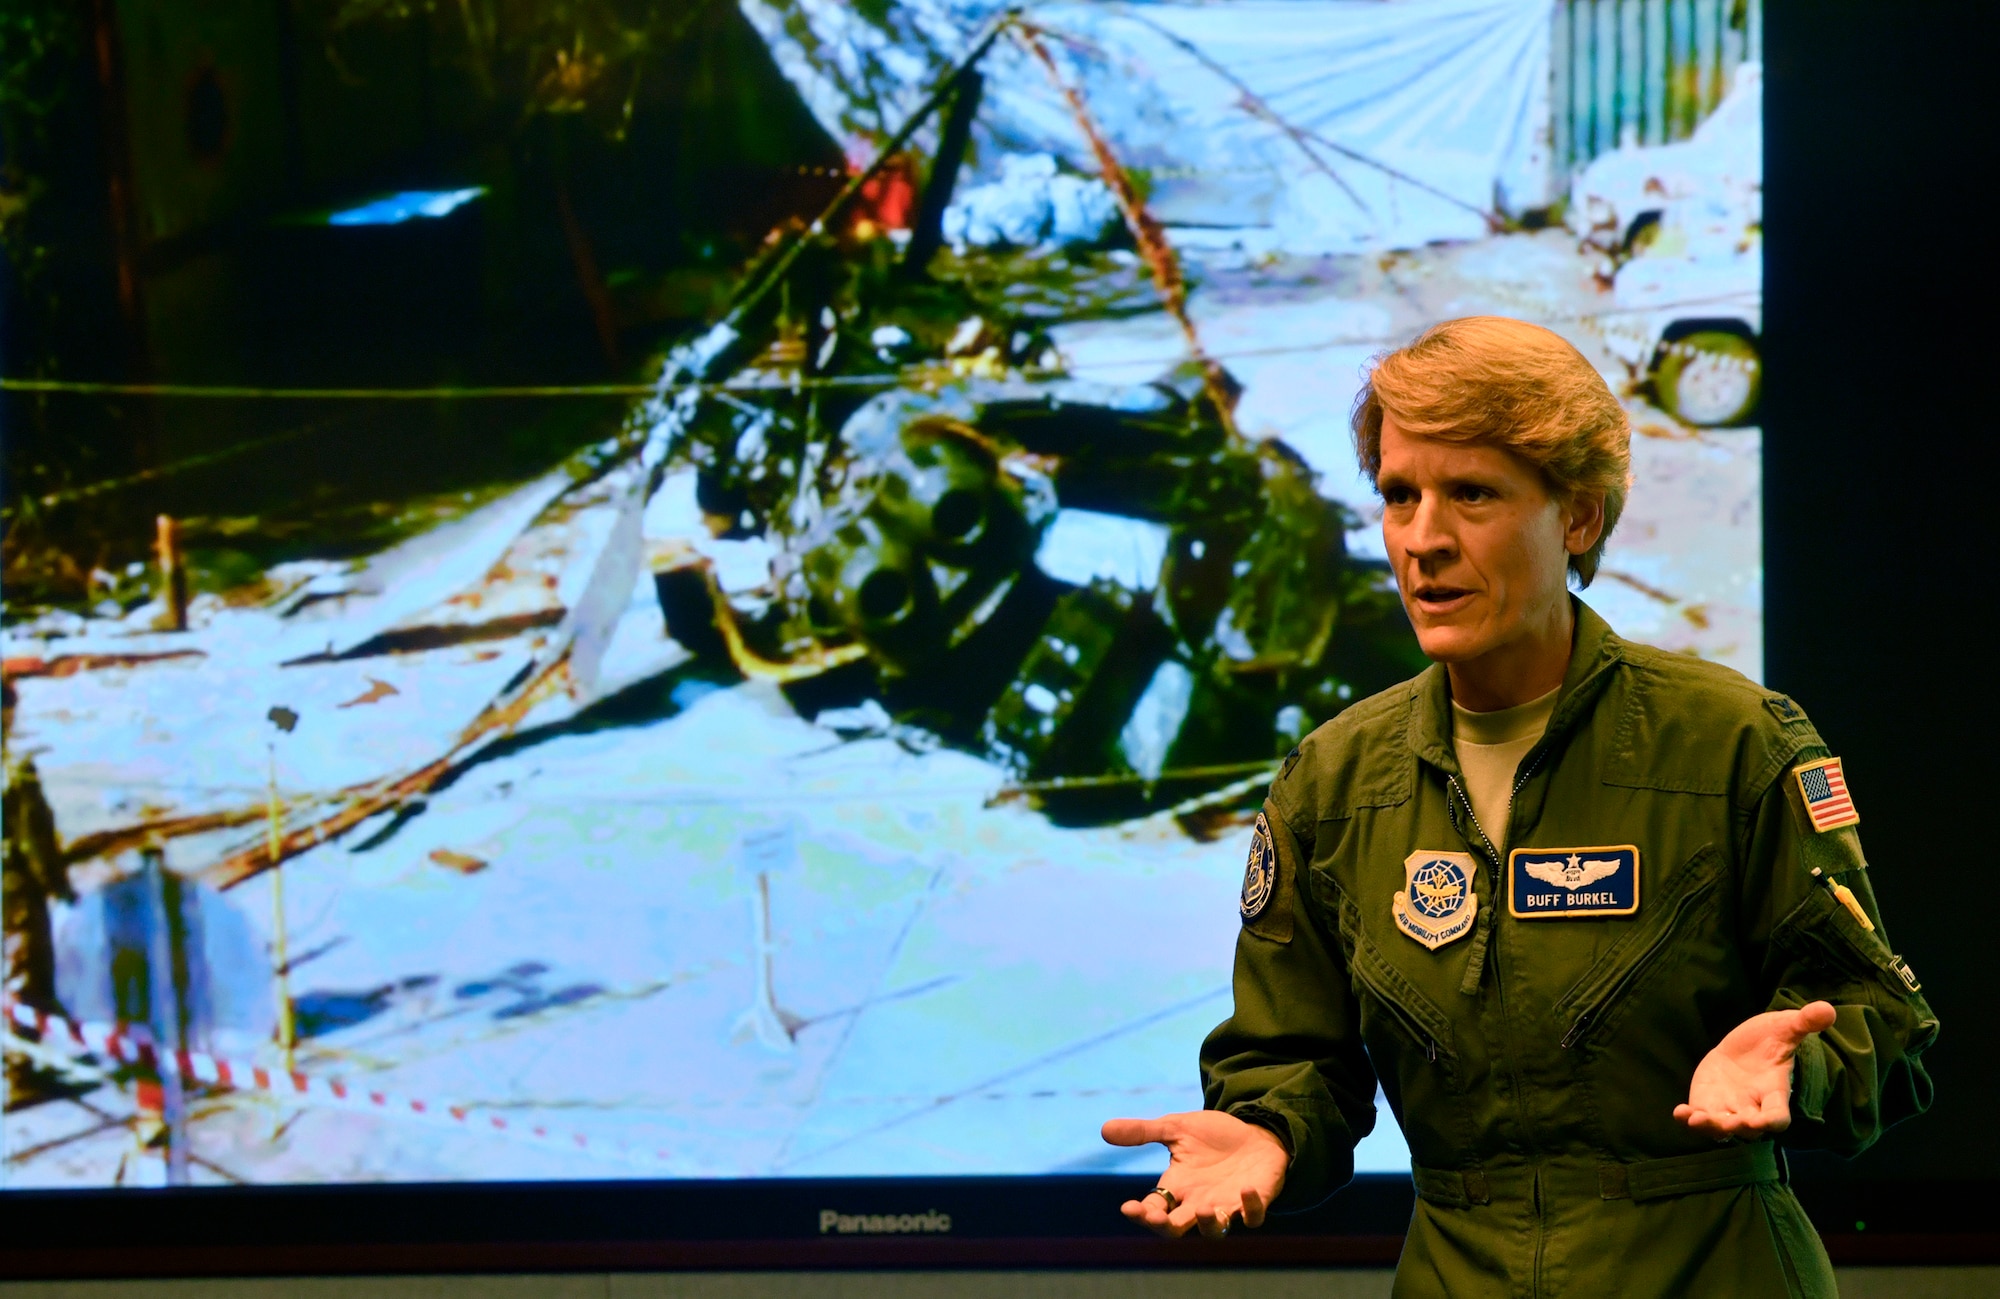 On Oct 11, 2015, Col. Laurel Burkel was rescued from the mangled wreckage of the helicopter crash in Afghanistan. Burkel lived to tell her story, but Maj. Phyllis Pelky, Master Sgt. Greg Kuhse, and three NATO partners were lost.
Recently, she shared her story of resiliency during a Wounded Warrior Care Ambassador workshop event at the 53d Wing.